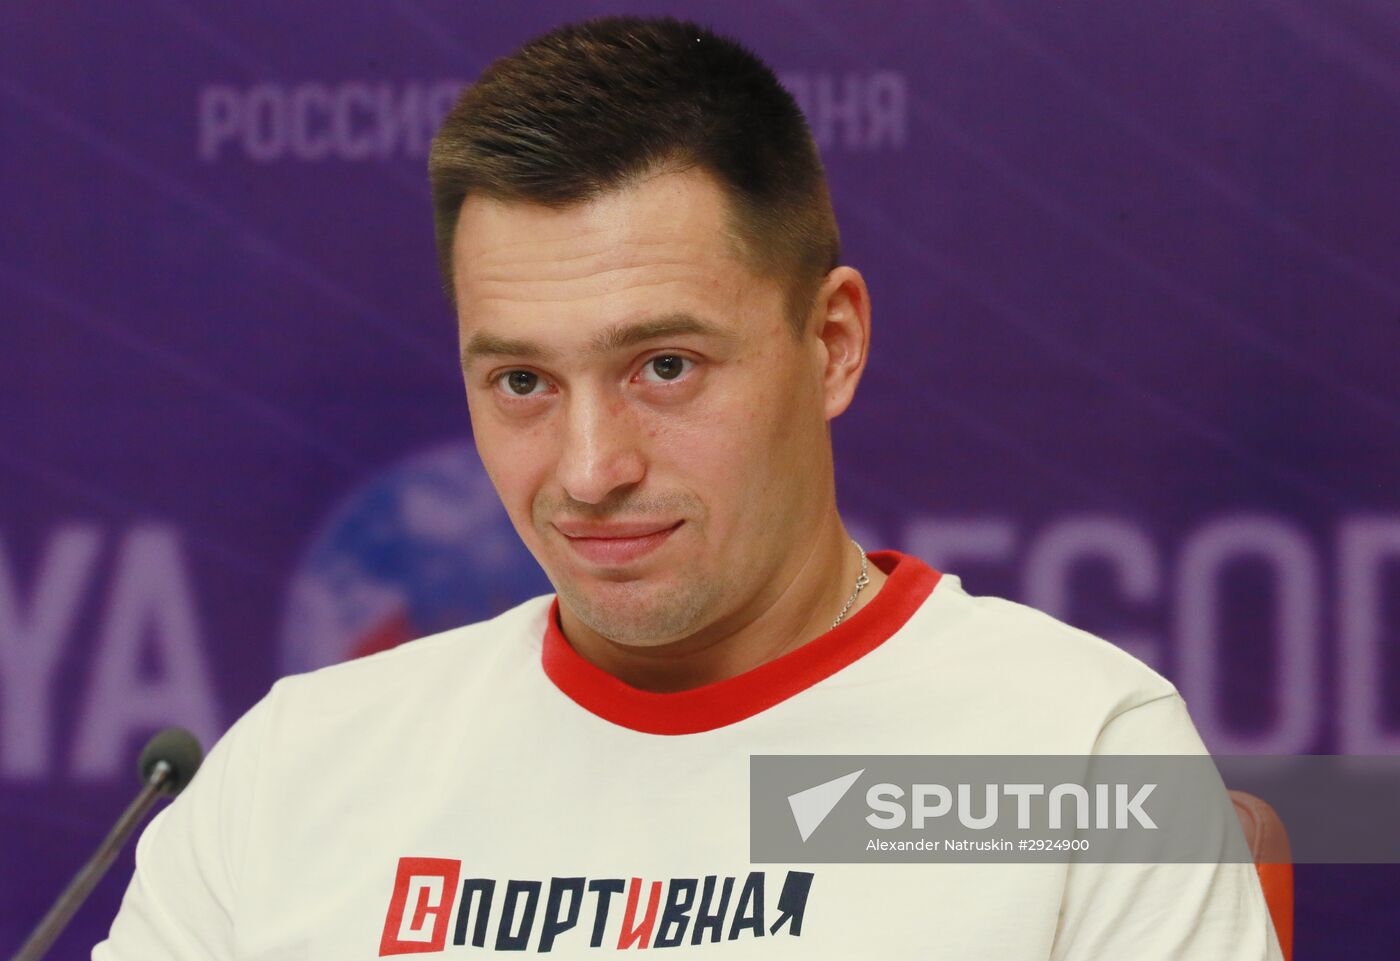 News conference on Alexei Nemov and Sport Legends show